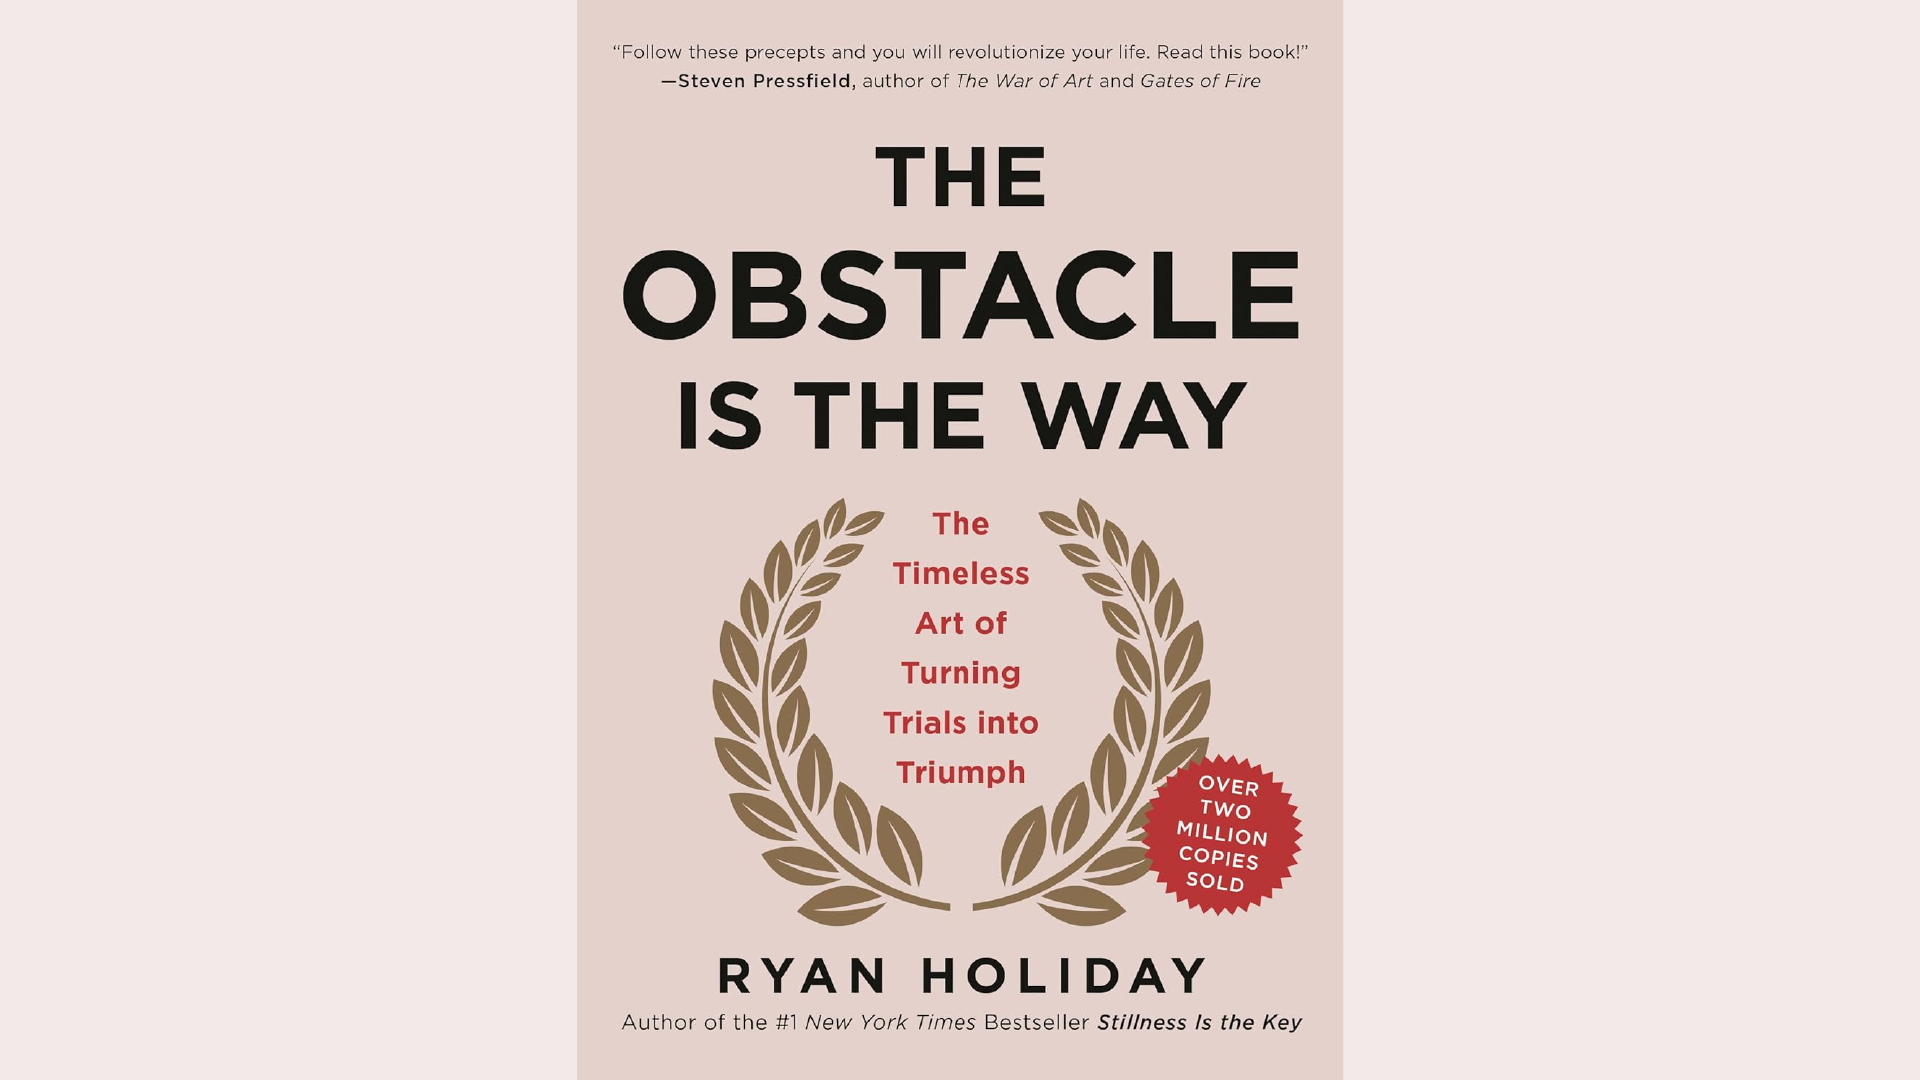 Summary: The Obstacle is the Way by Ryan Holiday